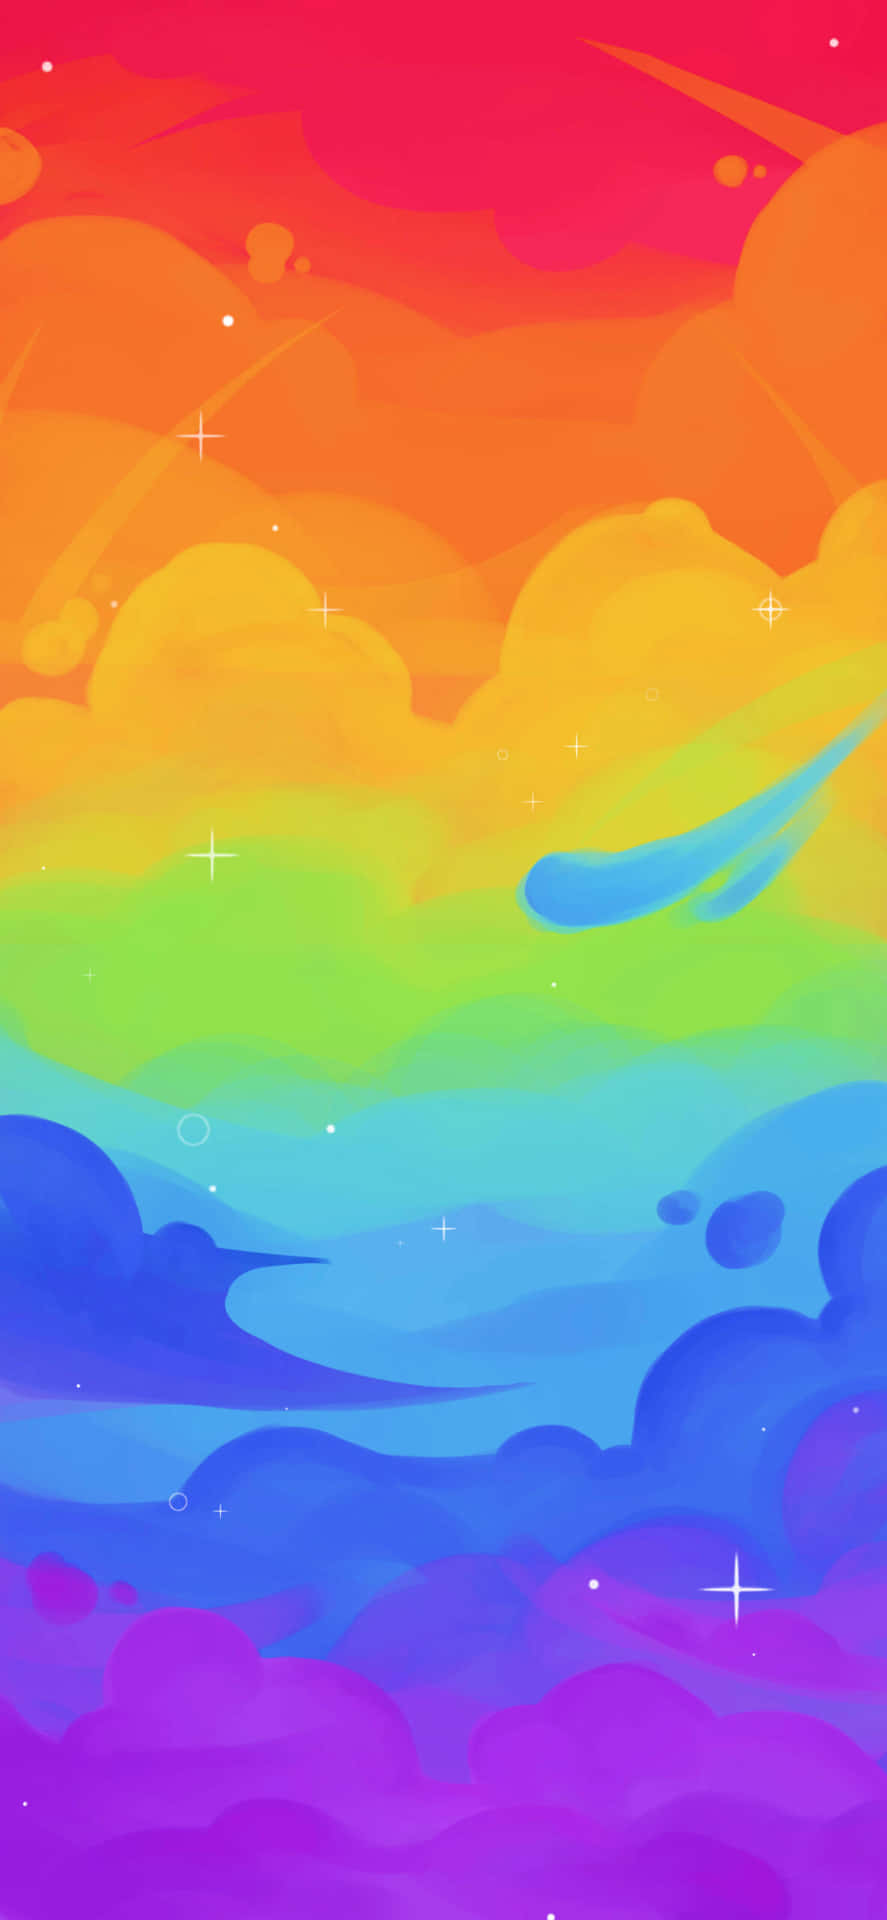 Aesthetic Lgbt Rainbow Clouds Painting Wallpaper